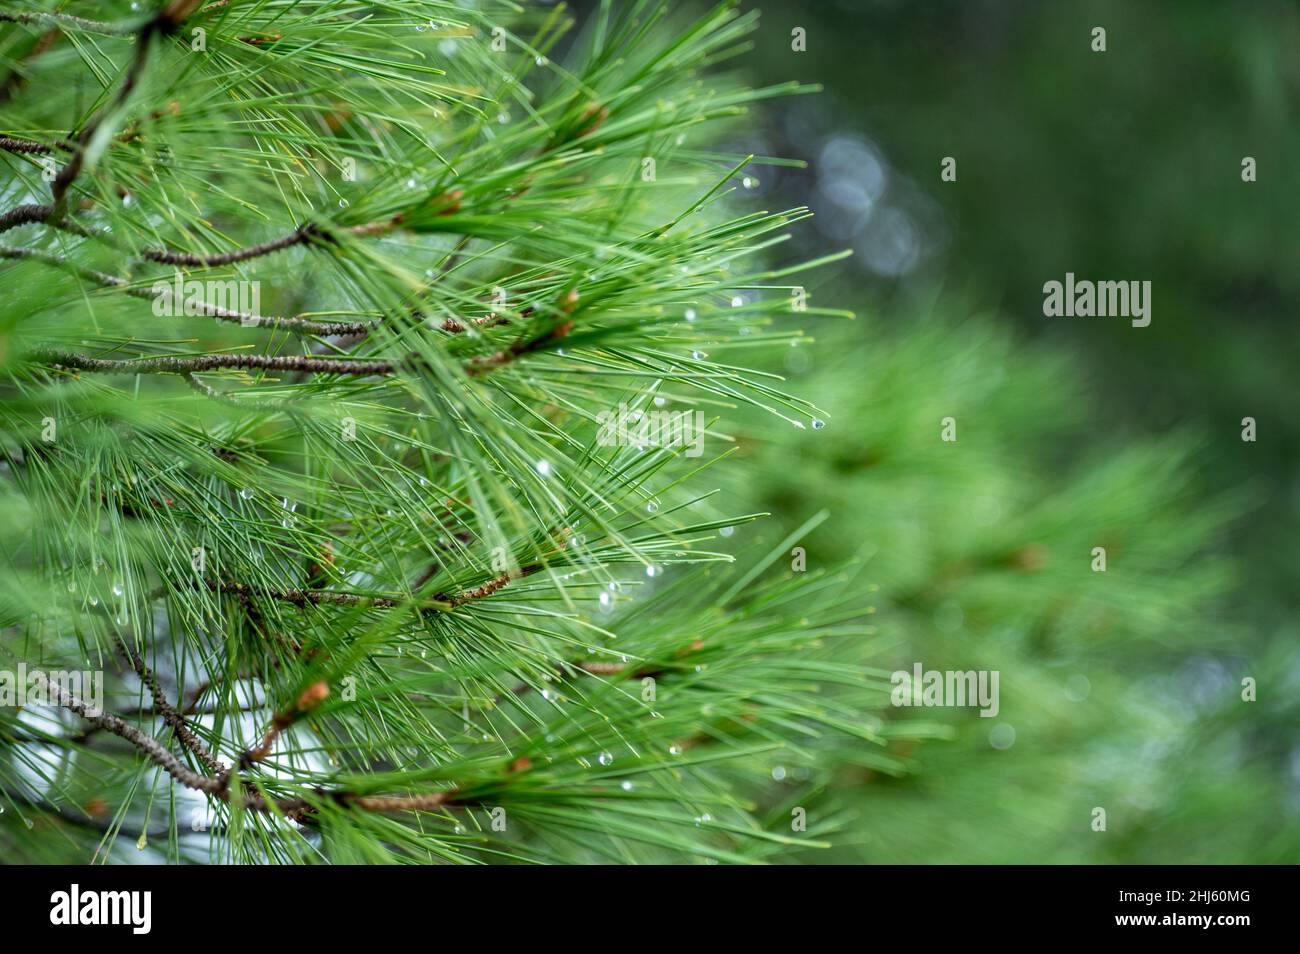 pine branches after rain. wet pine branches after rain close up. Raindrops on a pine needle. Natural blurred background with needles twigs and drops a Stock Photo